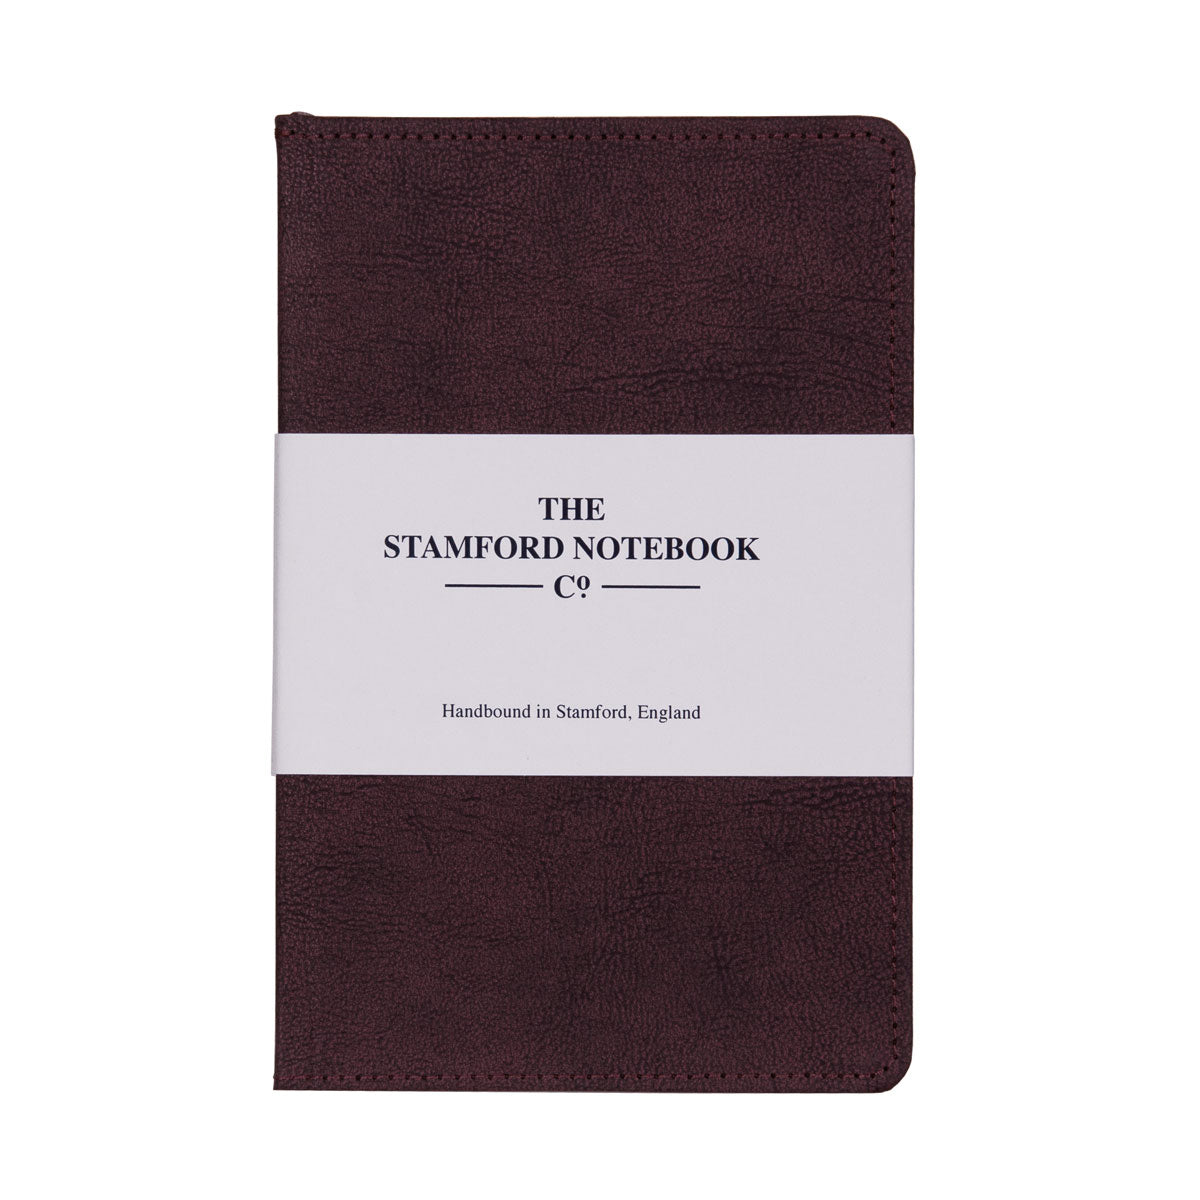 Vintage stitched Recycled Leather Notebook in Plum